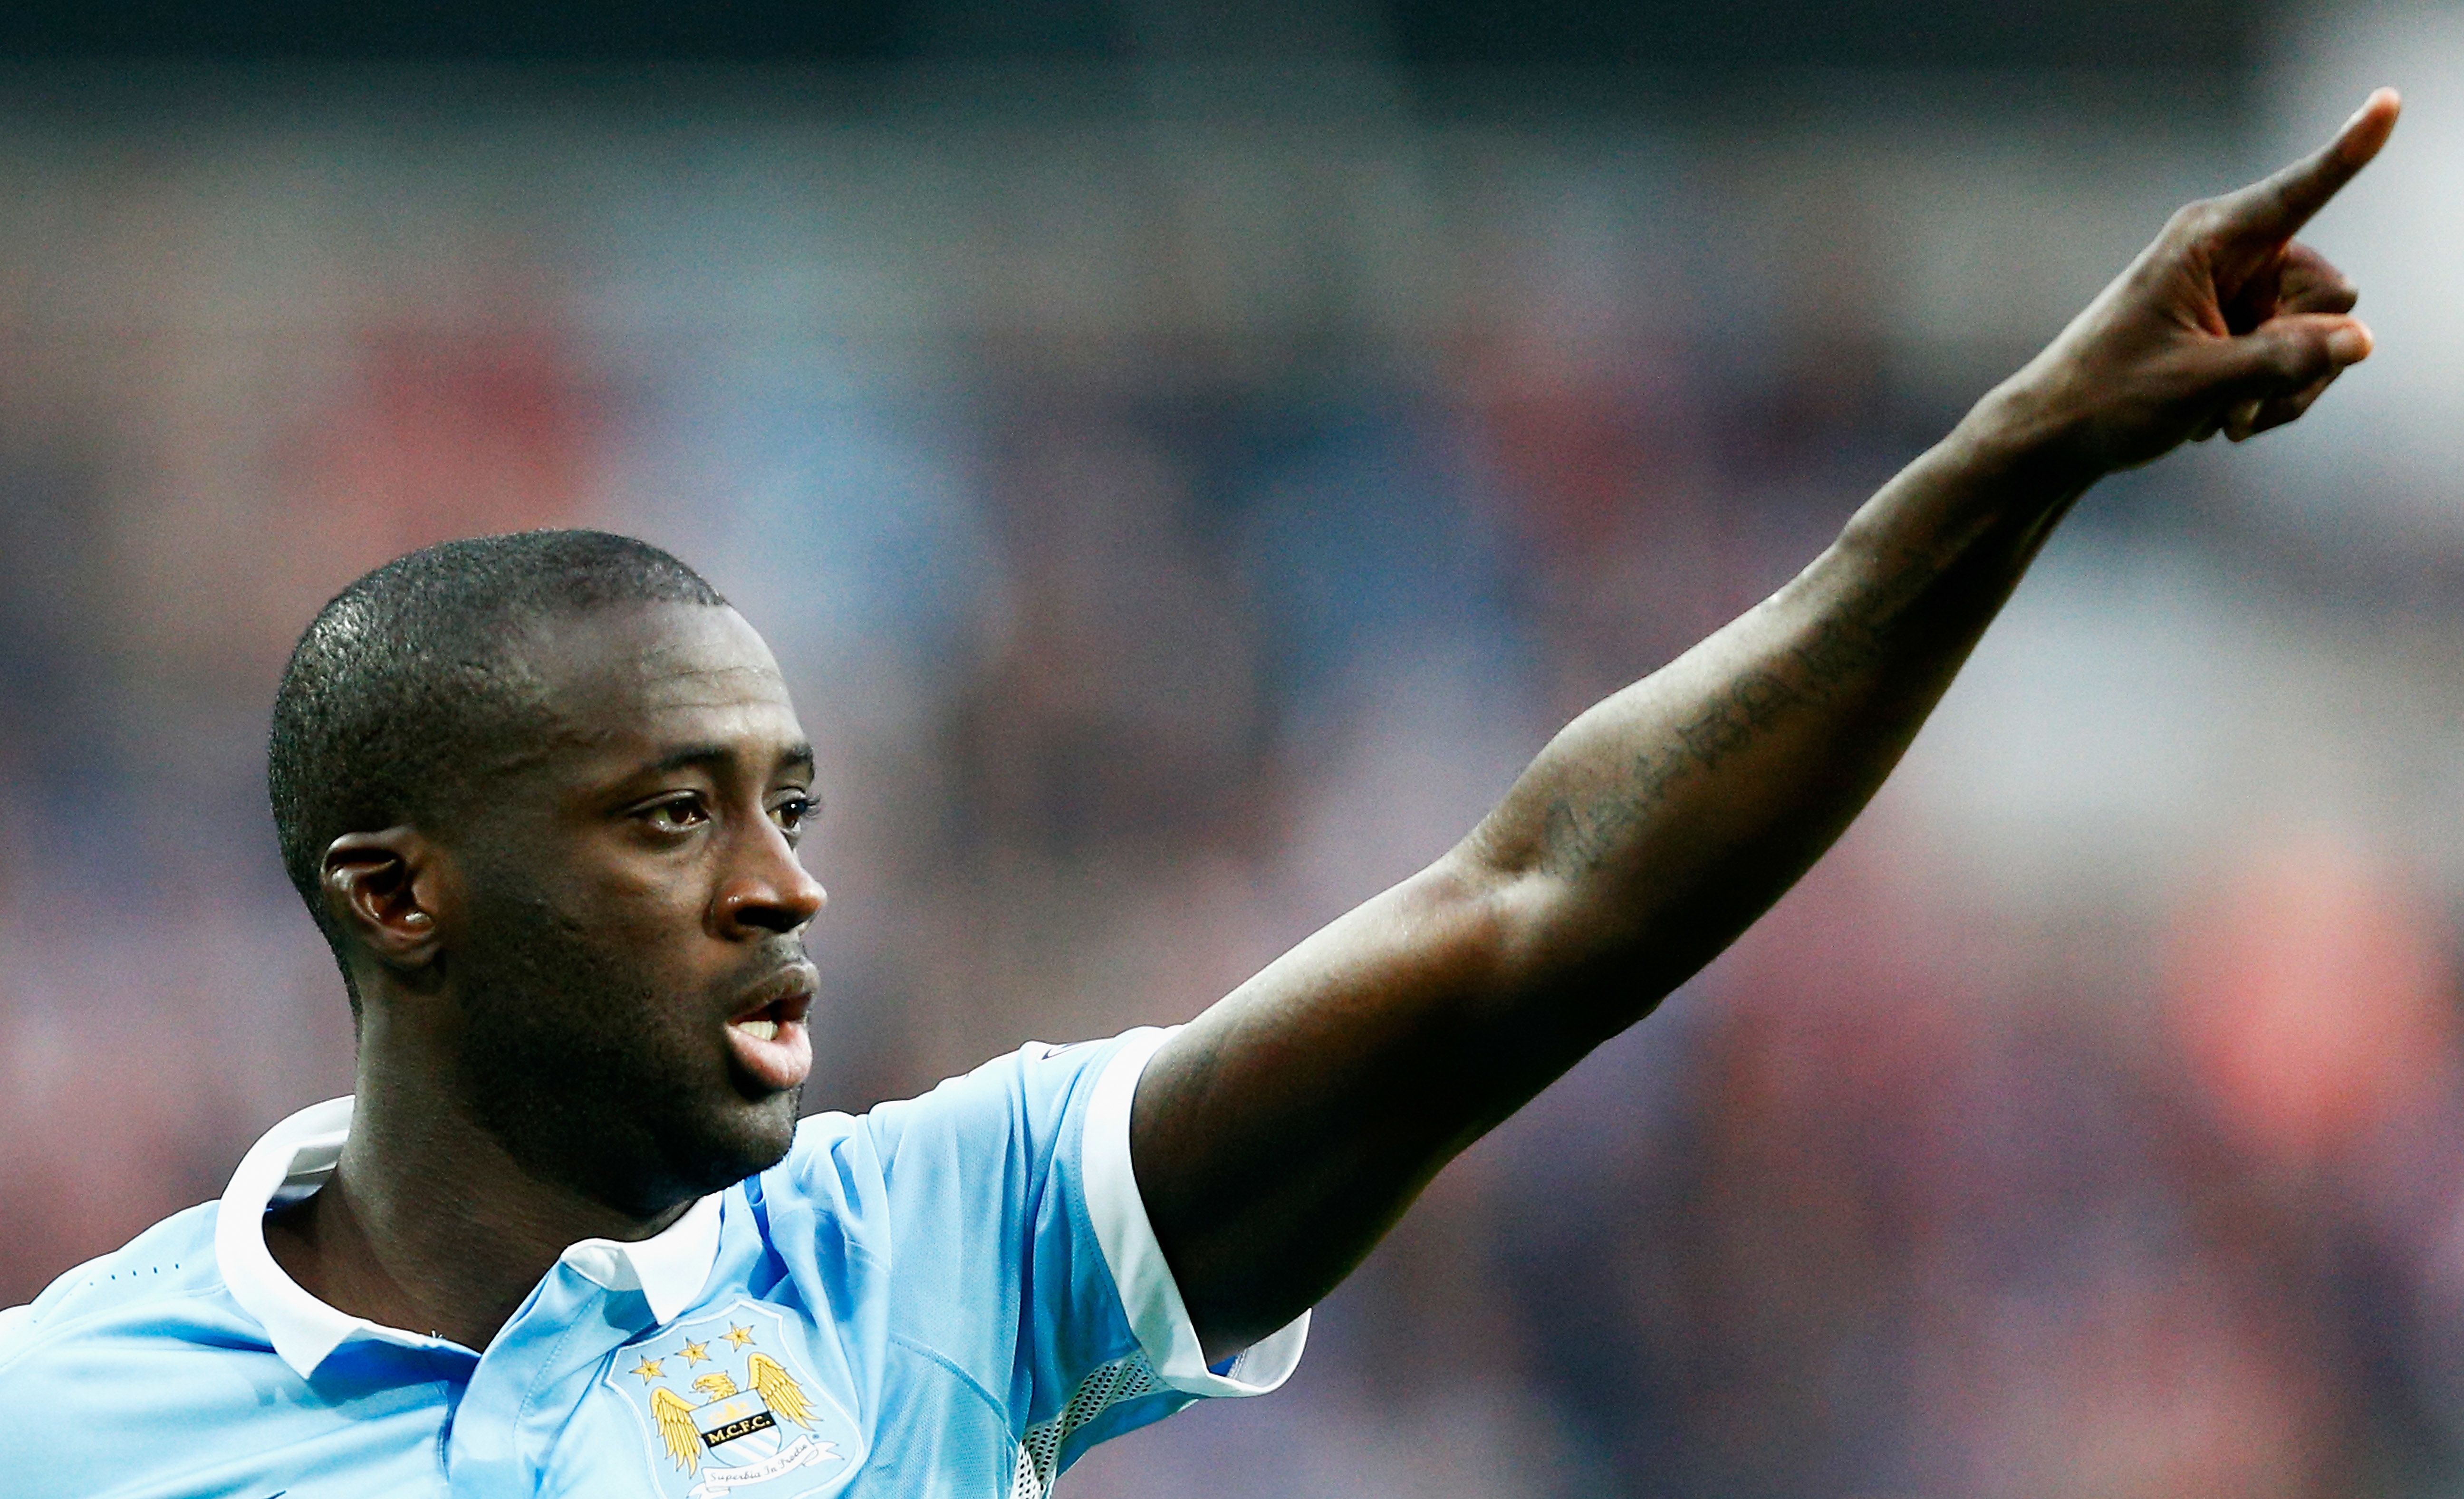 On Yaya Toure's 32nd birthday, here are 32 facts about the